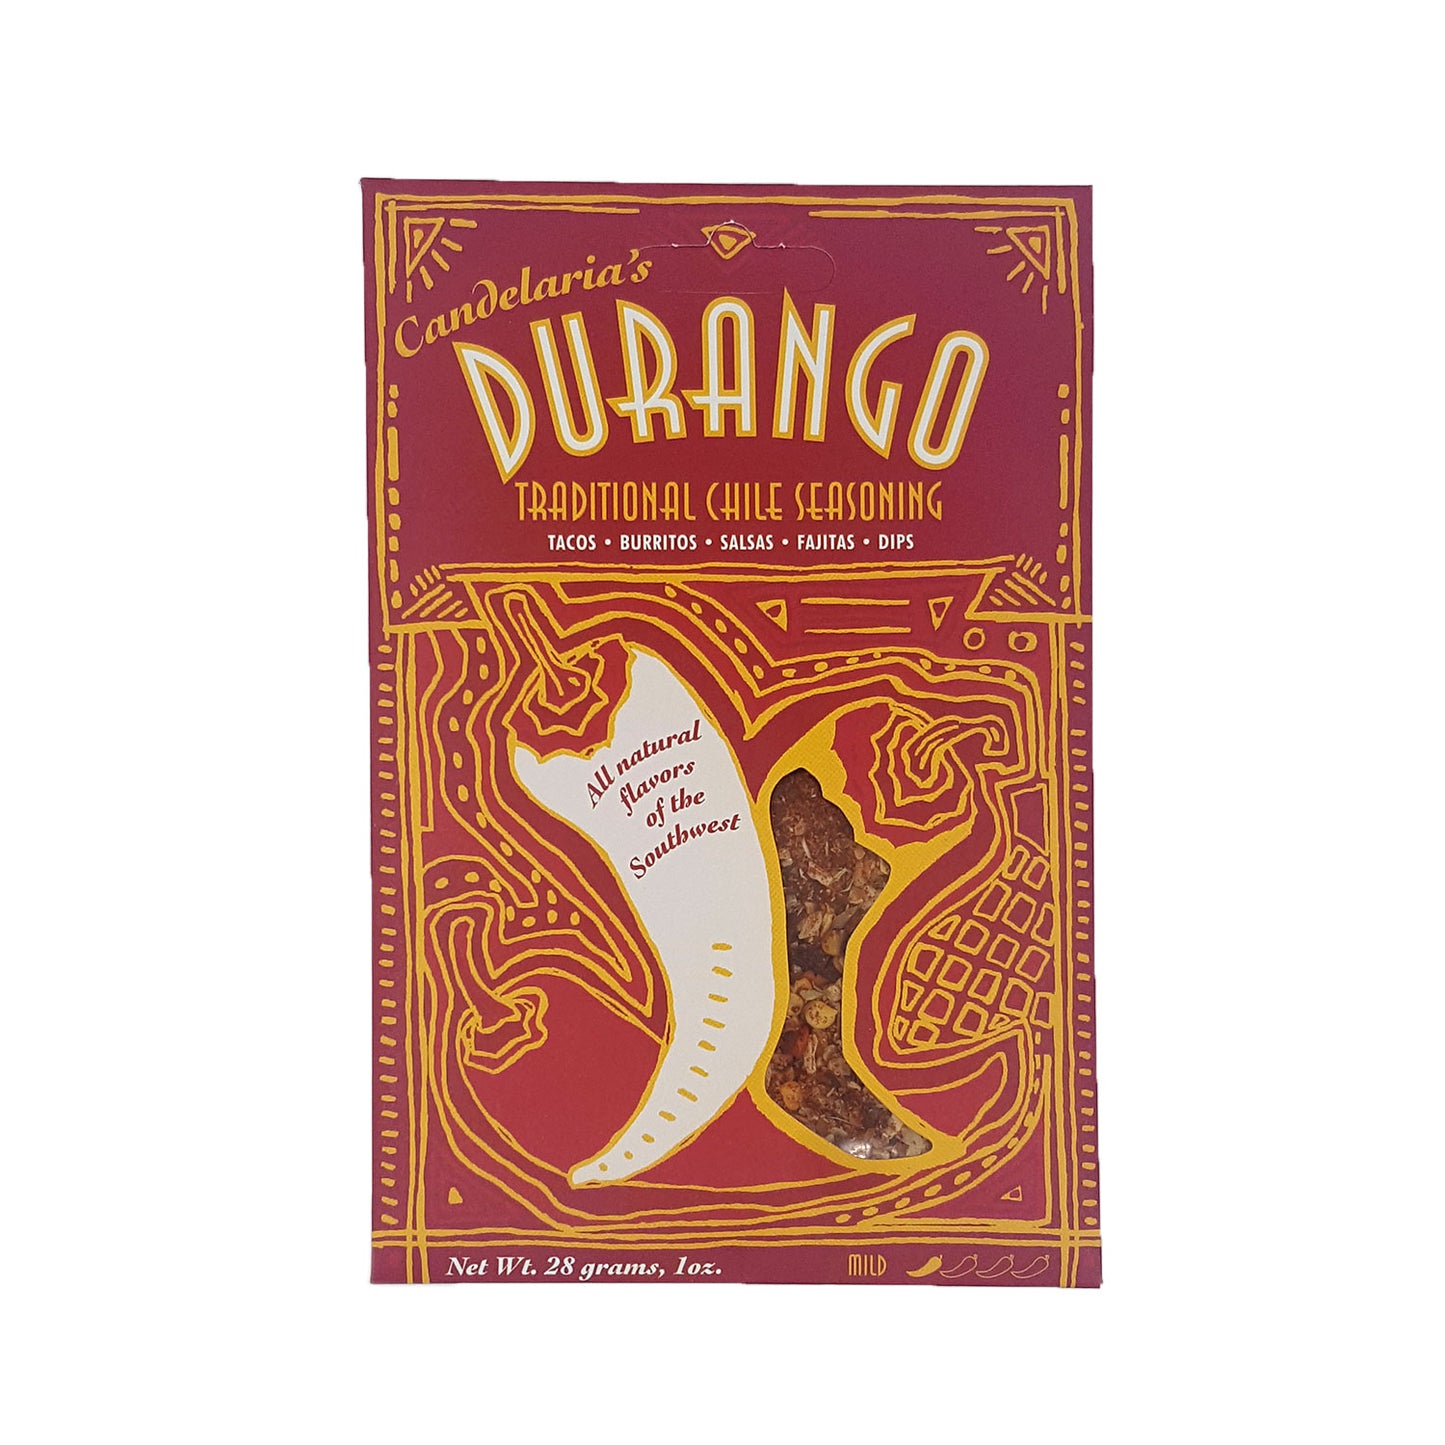 Candelaria's Durango traditional chile seasoning. Mix to make a great pineapple salsa.